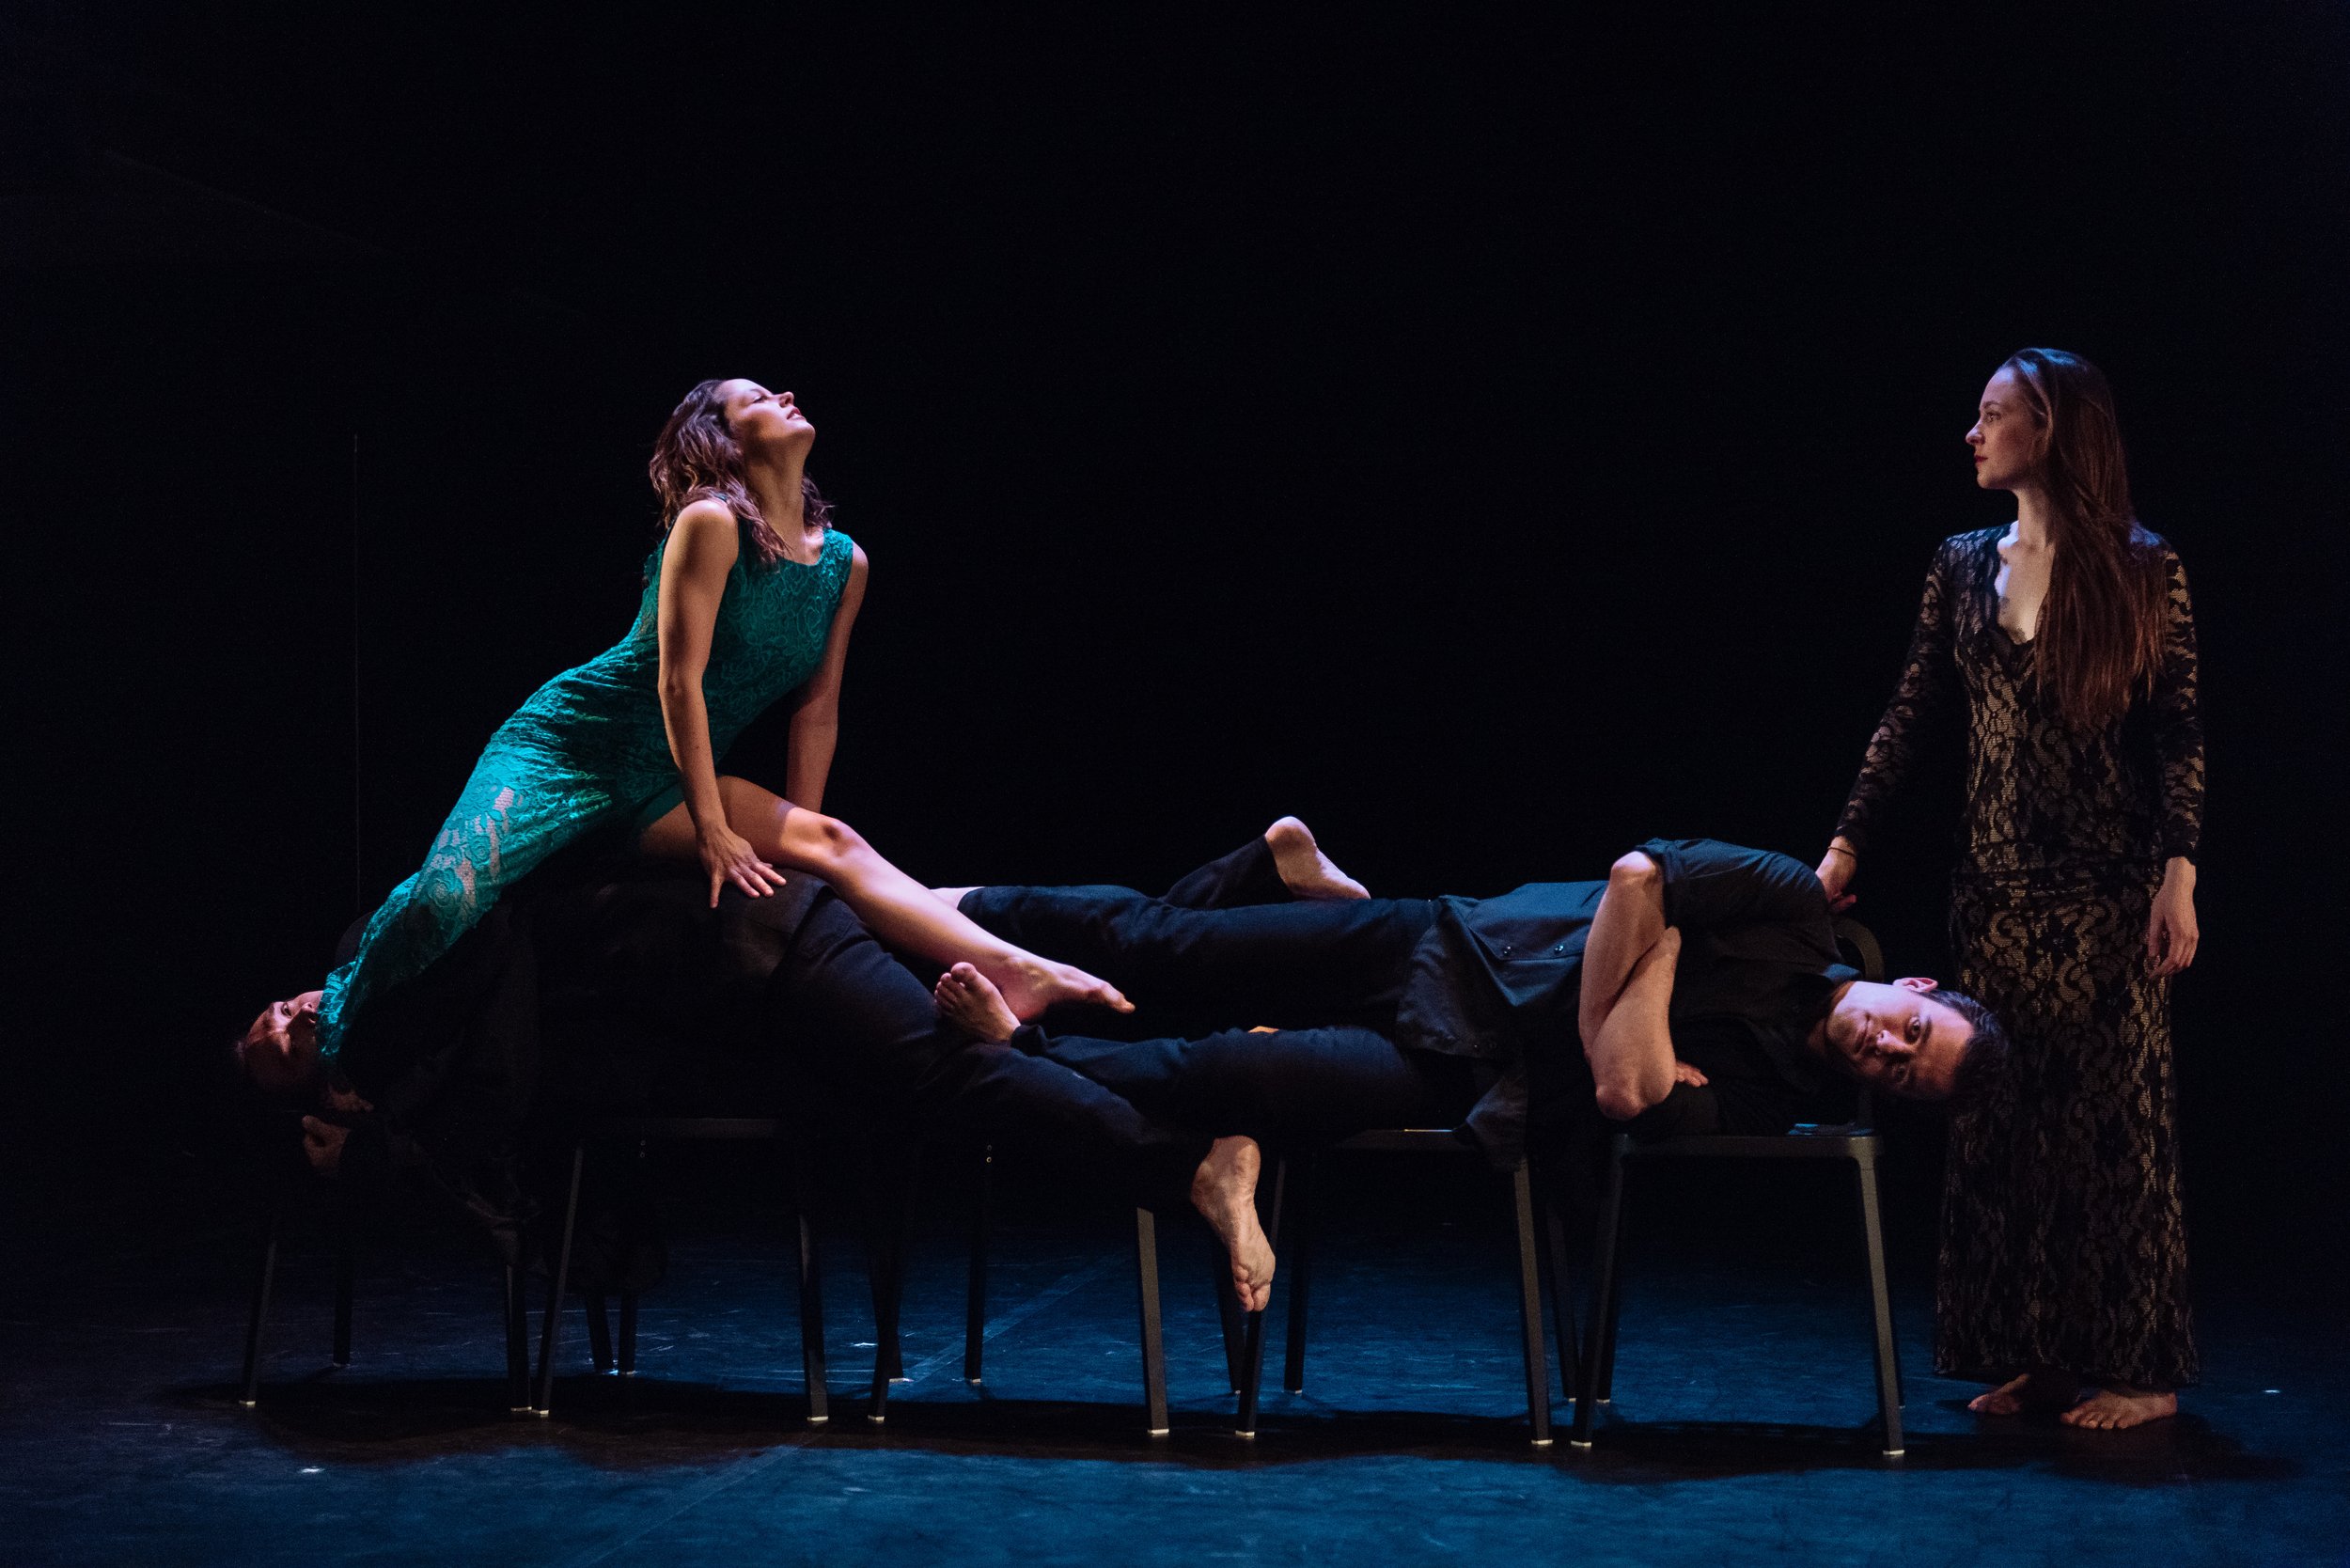 Several dancers lay across several chairs.